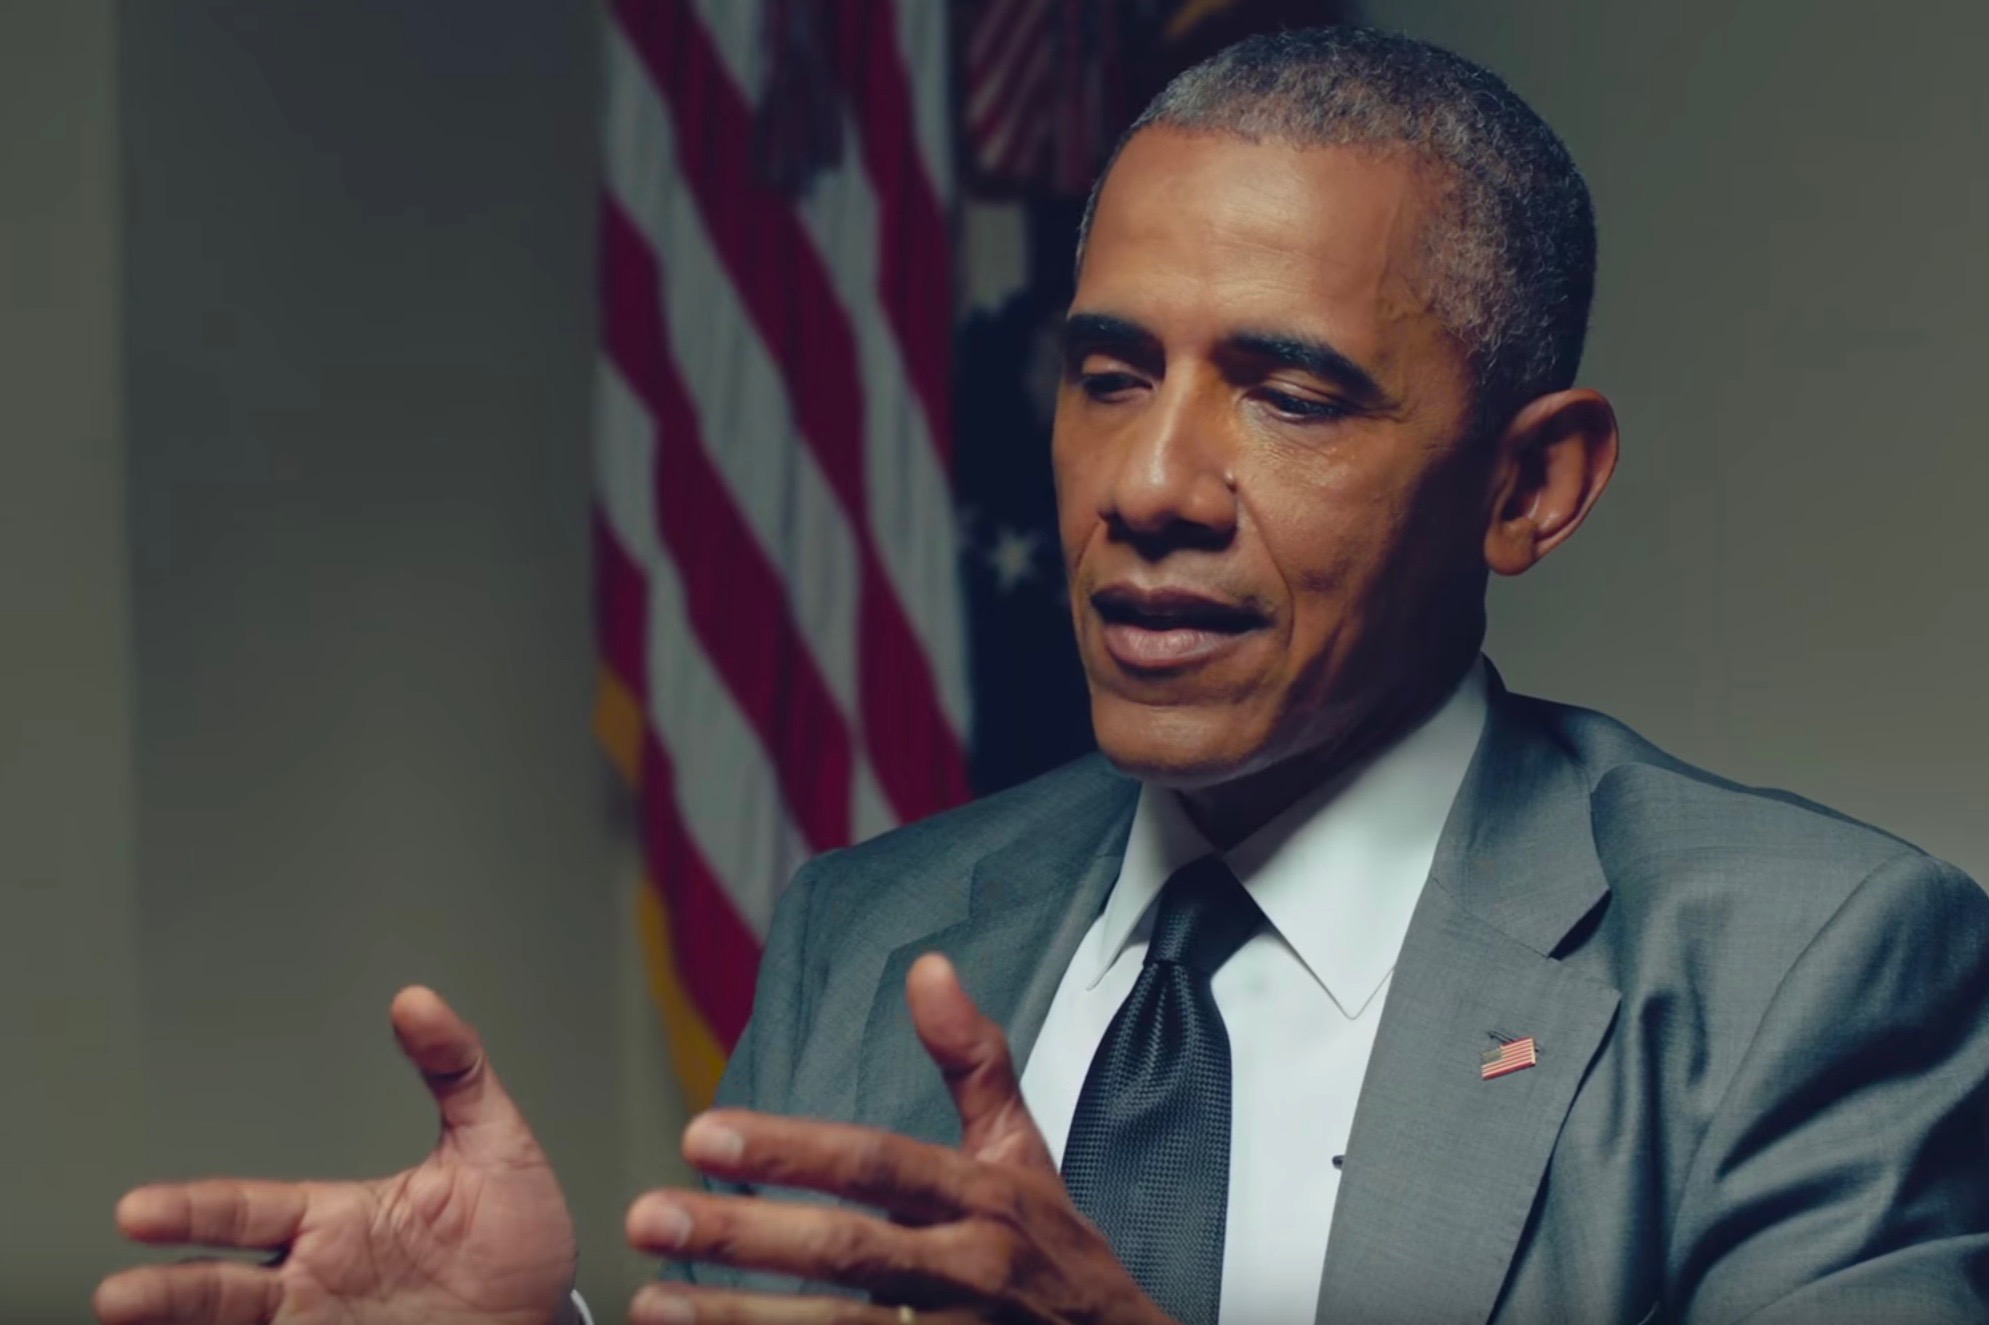 Obama on autonomous cars; “The technology is essentially here”